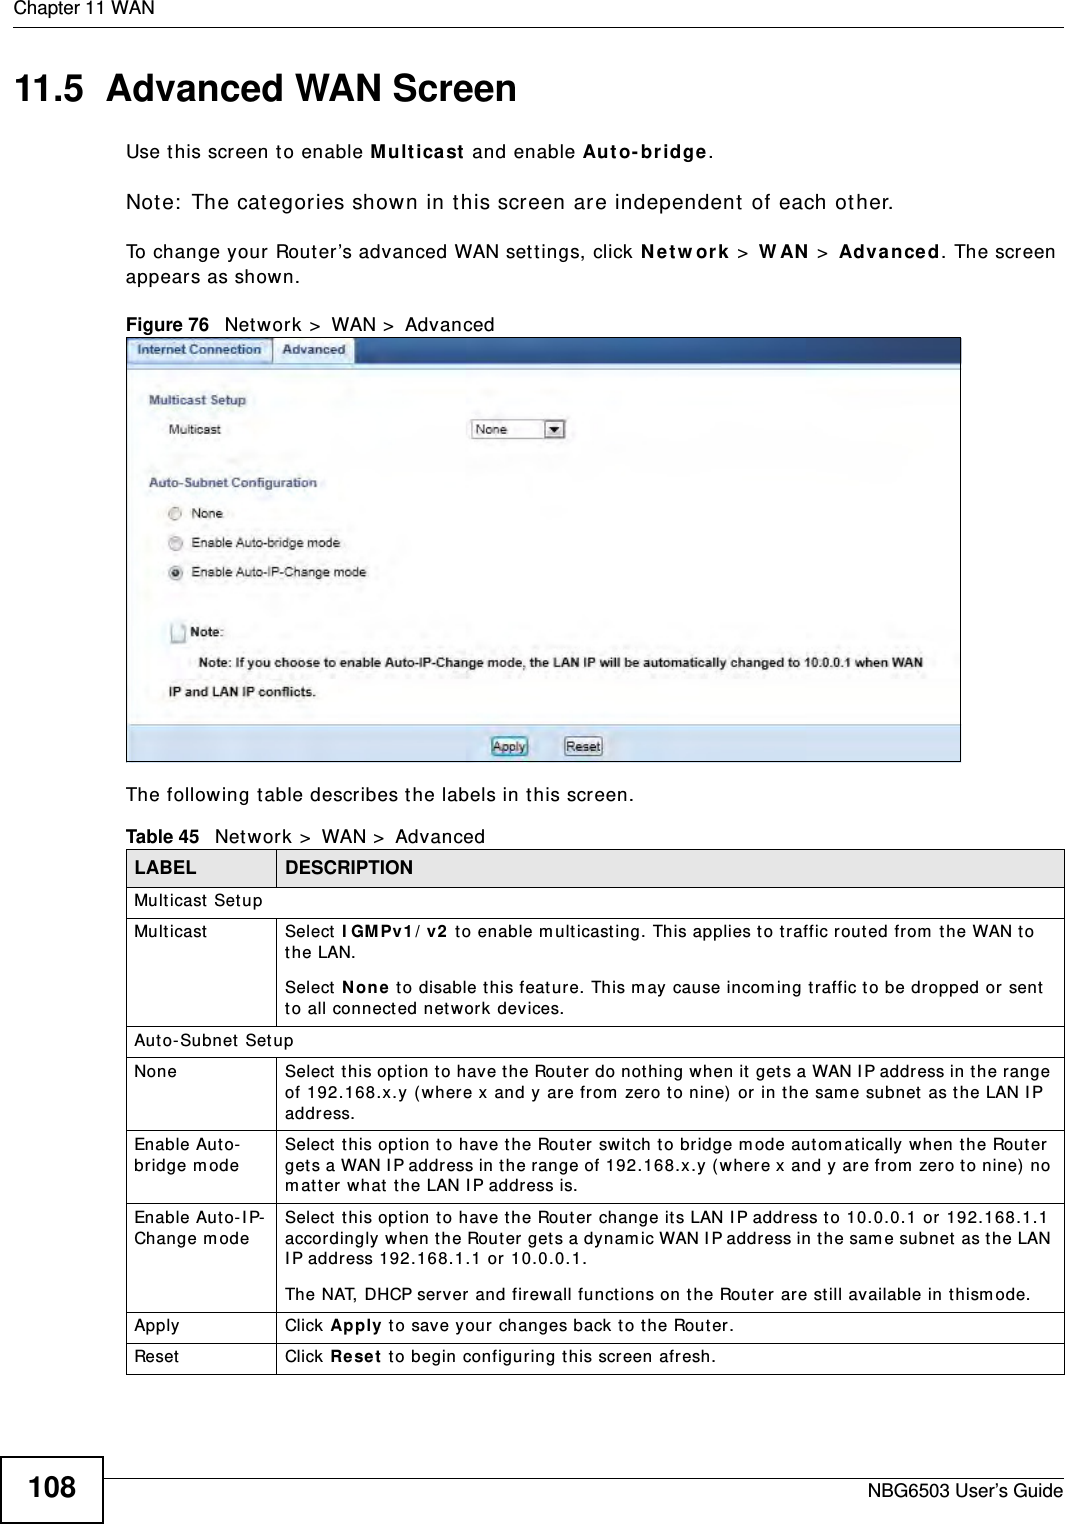 Chapter 11 WANNBG6503 User’s Guide10811.5  Advanced WAN ScreenUse this screen to enable Multicast and enable Auto-bridge.Note: The categories shown in this screen are independent of each other.  To change your Router’s advanced WAN settings, click Network &gt; WAN &gt; Advanced. The screen appears as shown.Figure 76   Network &gt; WAN &gt; AdvancedThe following table describes the labels in this screen.Table 45   Network &gt; WAN &gt; AdvancedLABEL DESCRIPTIONMulticast SetupMulticast Select IGMPv1/v2 to enable multicasting. This applies to traffic routed from the WAN to the LAN. Select None to disable this feature. This may cause incoming traffic to be dropped or sent to all connected network devices.Auto-Subnet SetupNone Select this option to have the Router do nothing when it gets a WAN IP address in the range of 192.168.x.y (where x and y are from zero to nine) or in the same subnet as the LAN IP address.Enable Auto-bridge mode Select this option to have the Router switch to bridge mode automatically when the Router gets a WAN IP address in the range of 192.168.x.y (where x and y are from zero to nine) no matter what the LAN IP address is. Enable Auto-IP-Change mode Select this option to have the Router change its LAN IP address to 10.0.0.1 or 192.168.1.1 accordingly when the Router gets a dynamic WAN IP address in the same subnet as the LAN IP address 192.168.1.1 or 10.0.0.1.The NAT, DHCP server and firewall functions on the Router are still available in thismode.Apply Click Apply to save your changes back to the Router.Reset Click Reset to begin configuring this screen afresh.